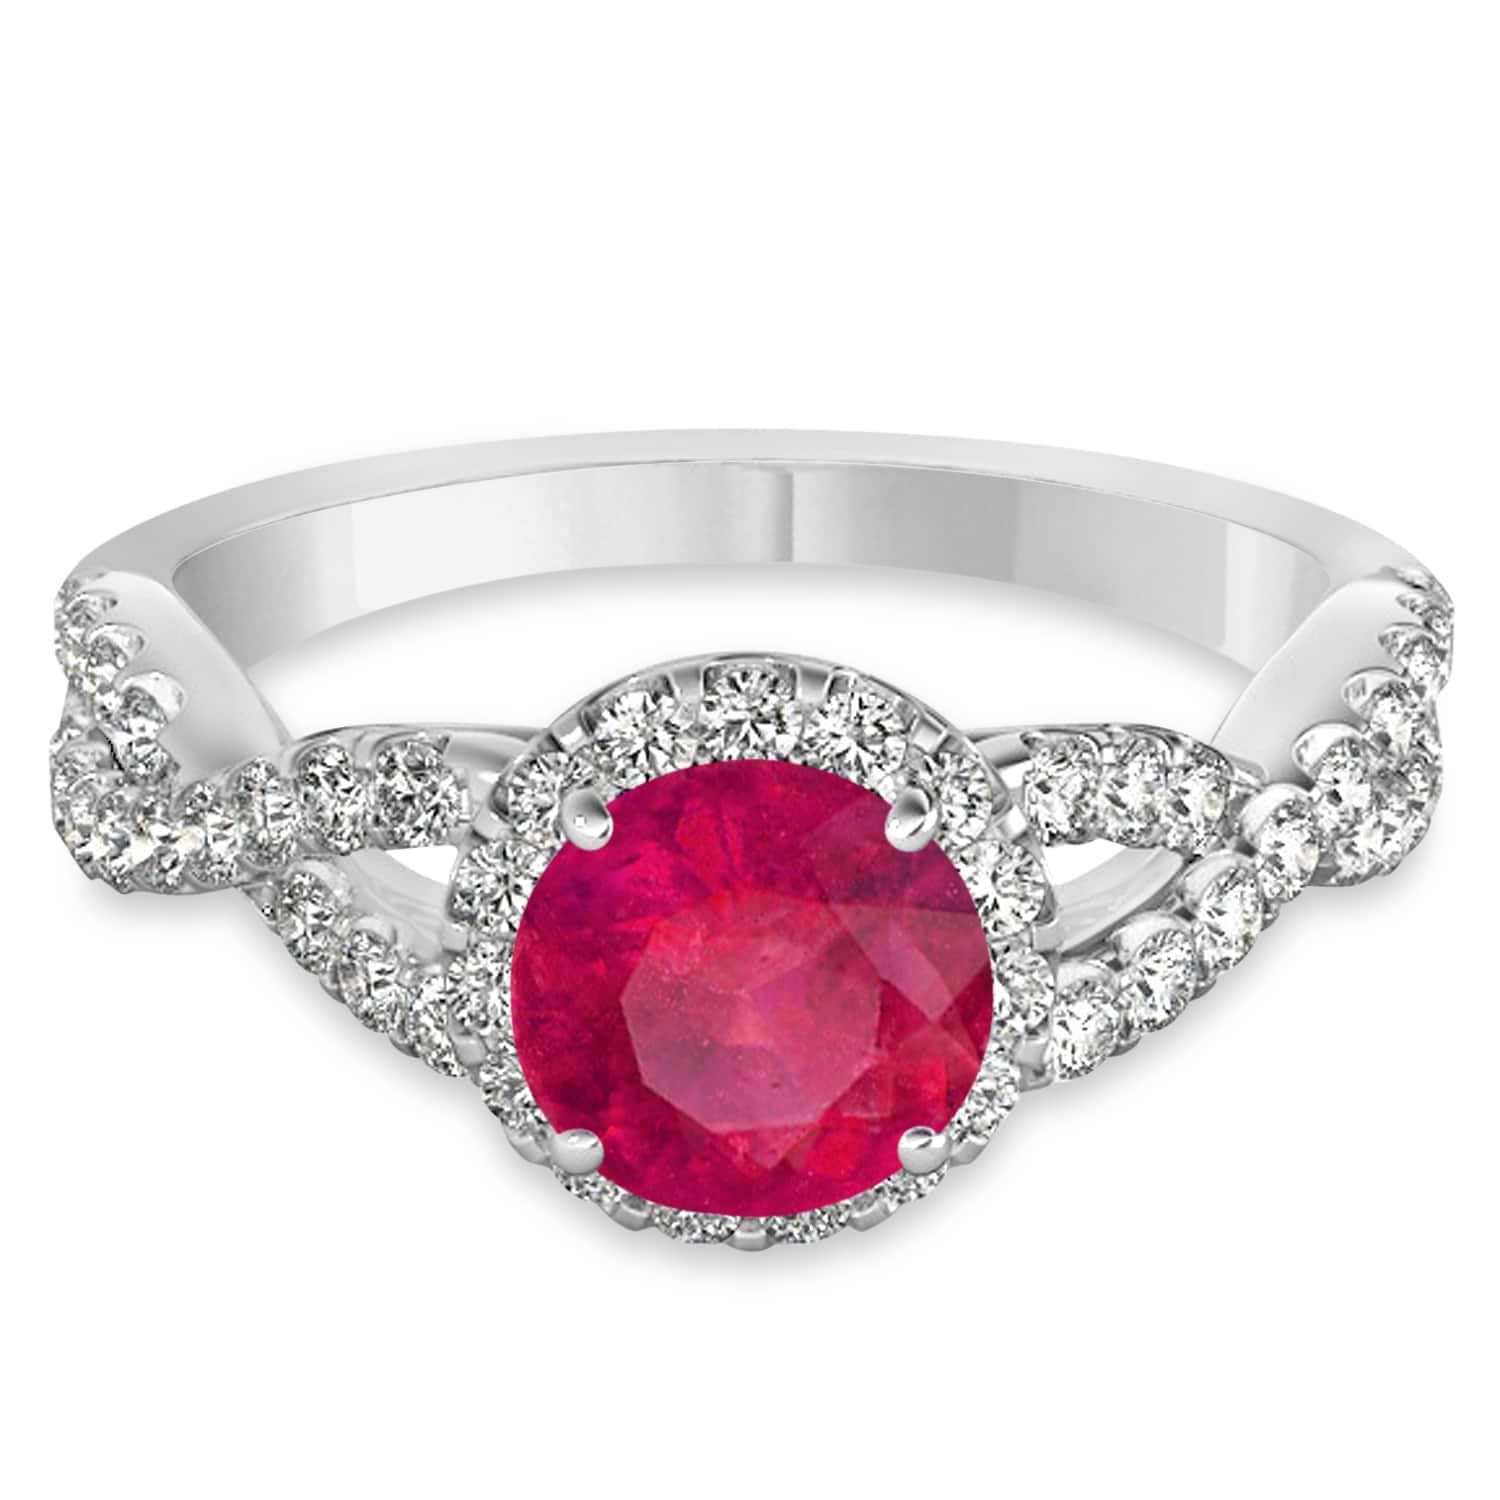 Ruby & Diamond Twisted Engagement Ring 18k White Gold 1.55ct